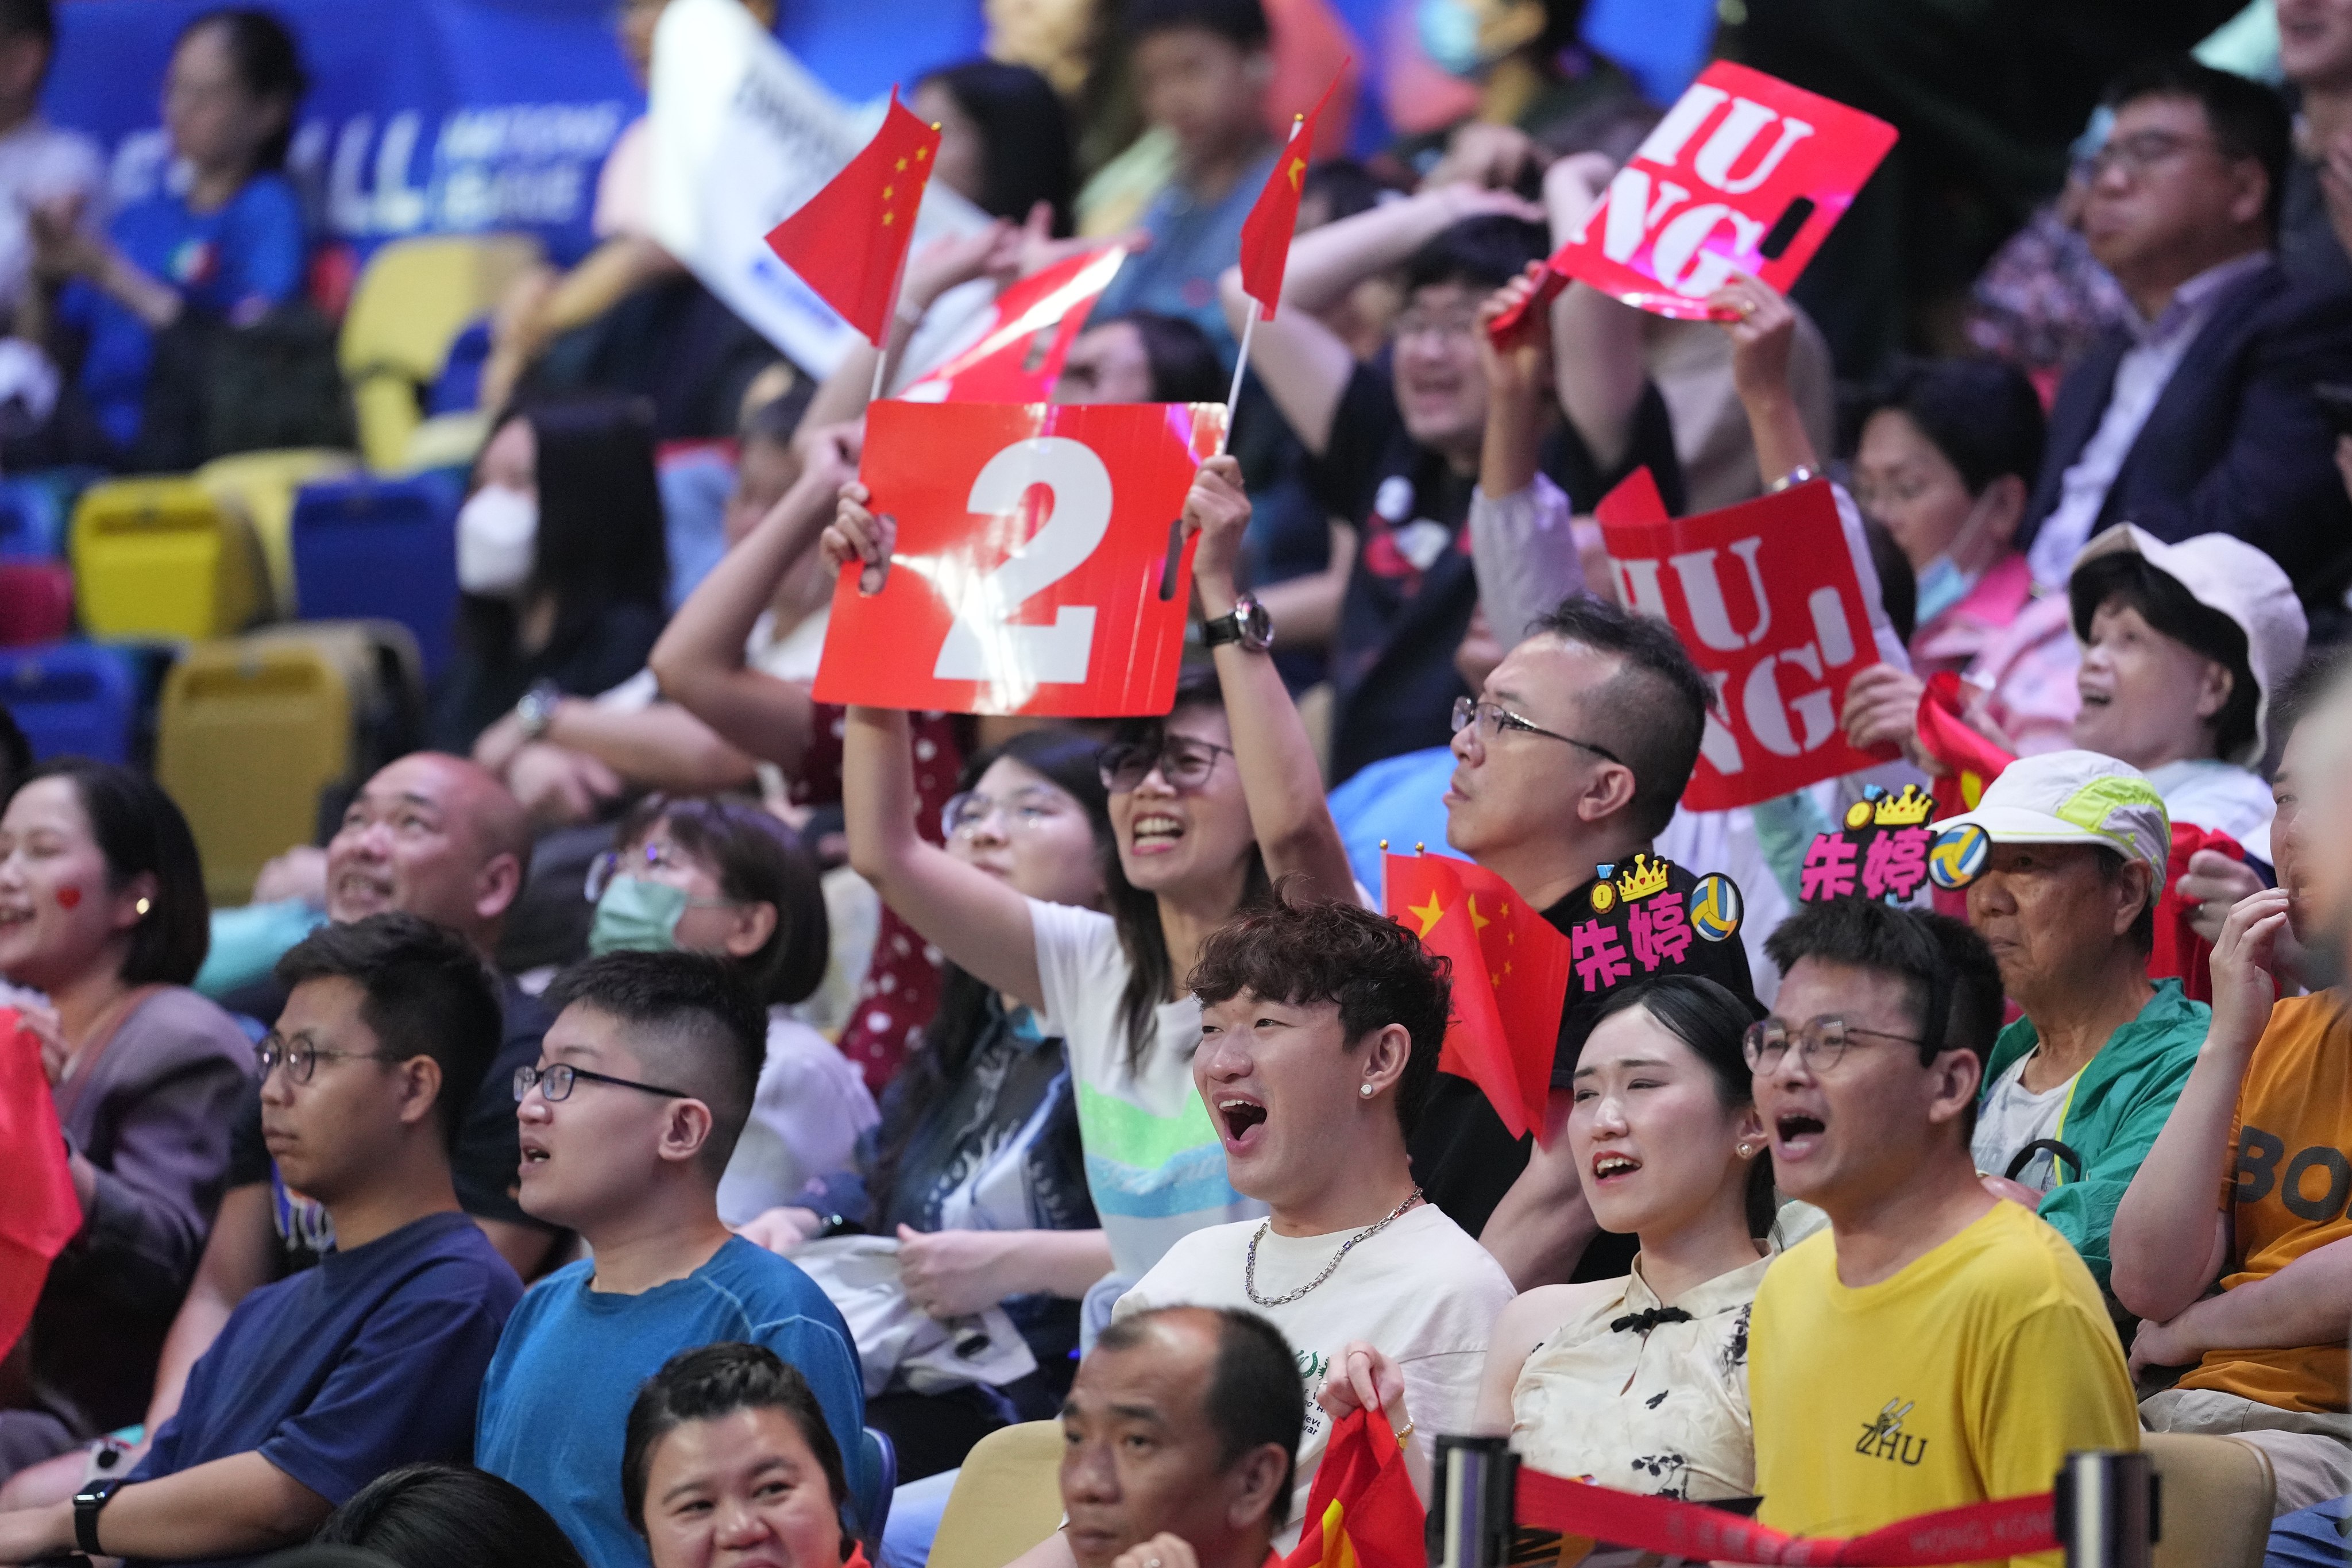 Supporters of the Chinese women’s volleyball team cheering at the Volleyball Nations League match in Hong Kong between China and Bulgaria on June 11. Photo: Elson Li